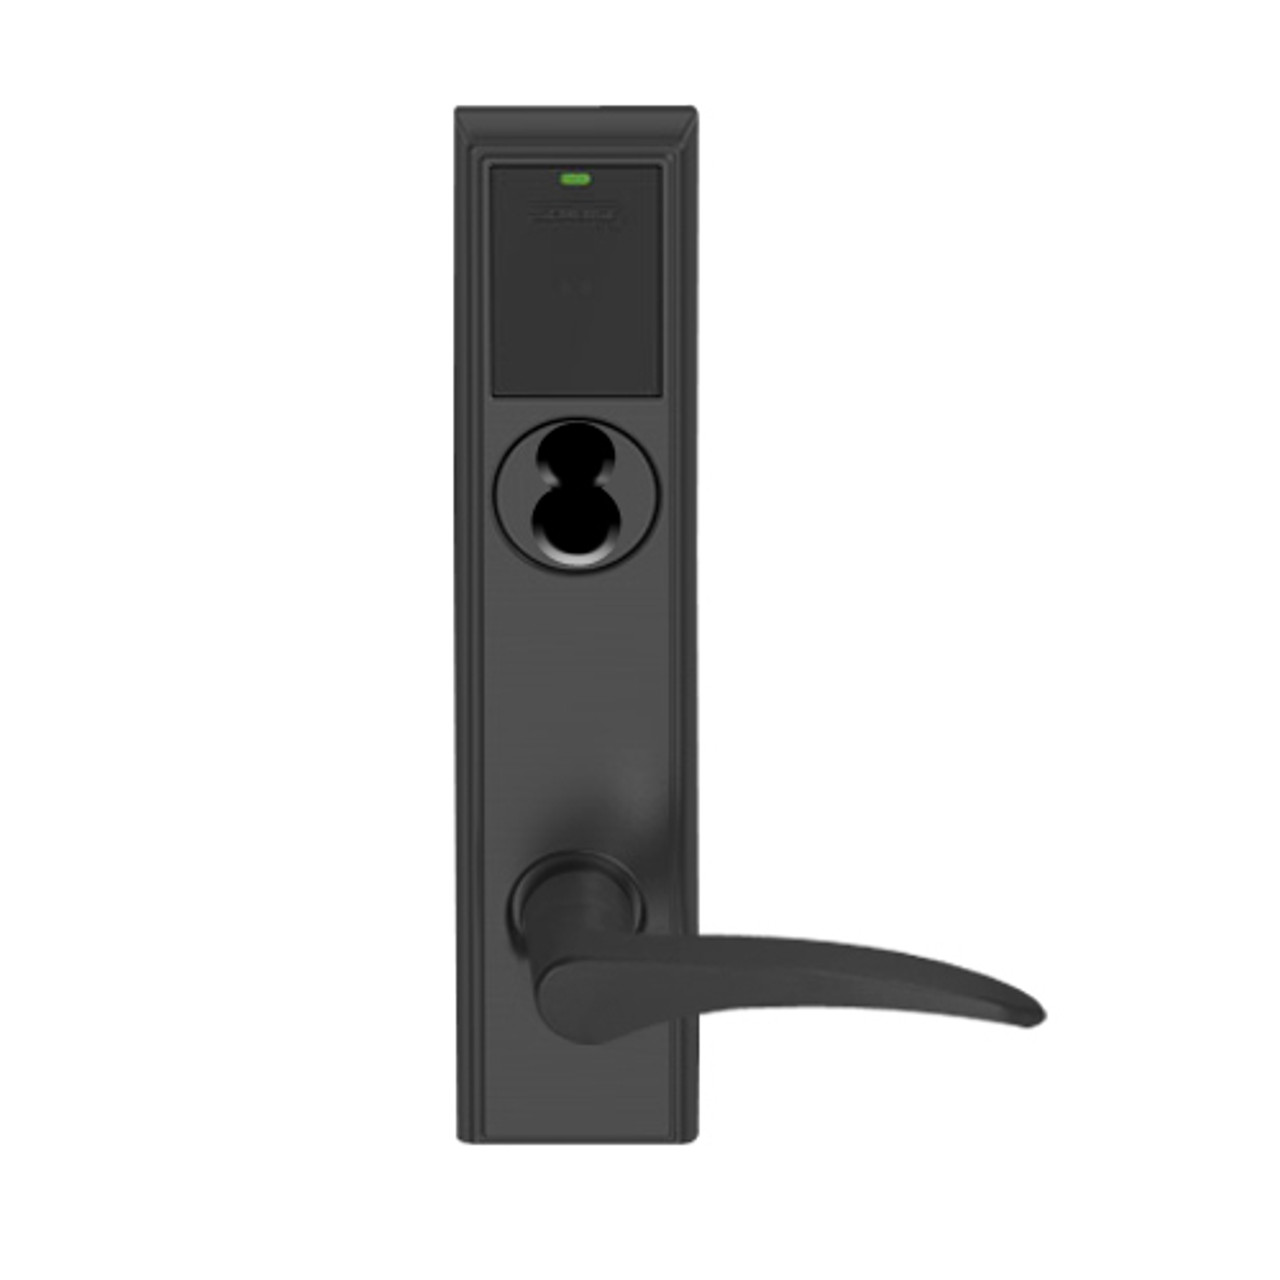 LEMD-ADD-J-12-622-LH Schlage Privacy/Apartment Wireless Addison Mortise Deadbolt Lock with LED and 12 Lever Prepped for FSIC in Matte Black